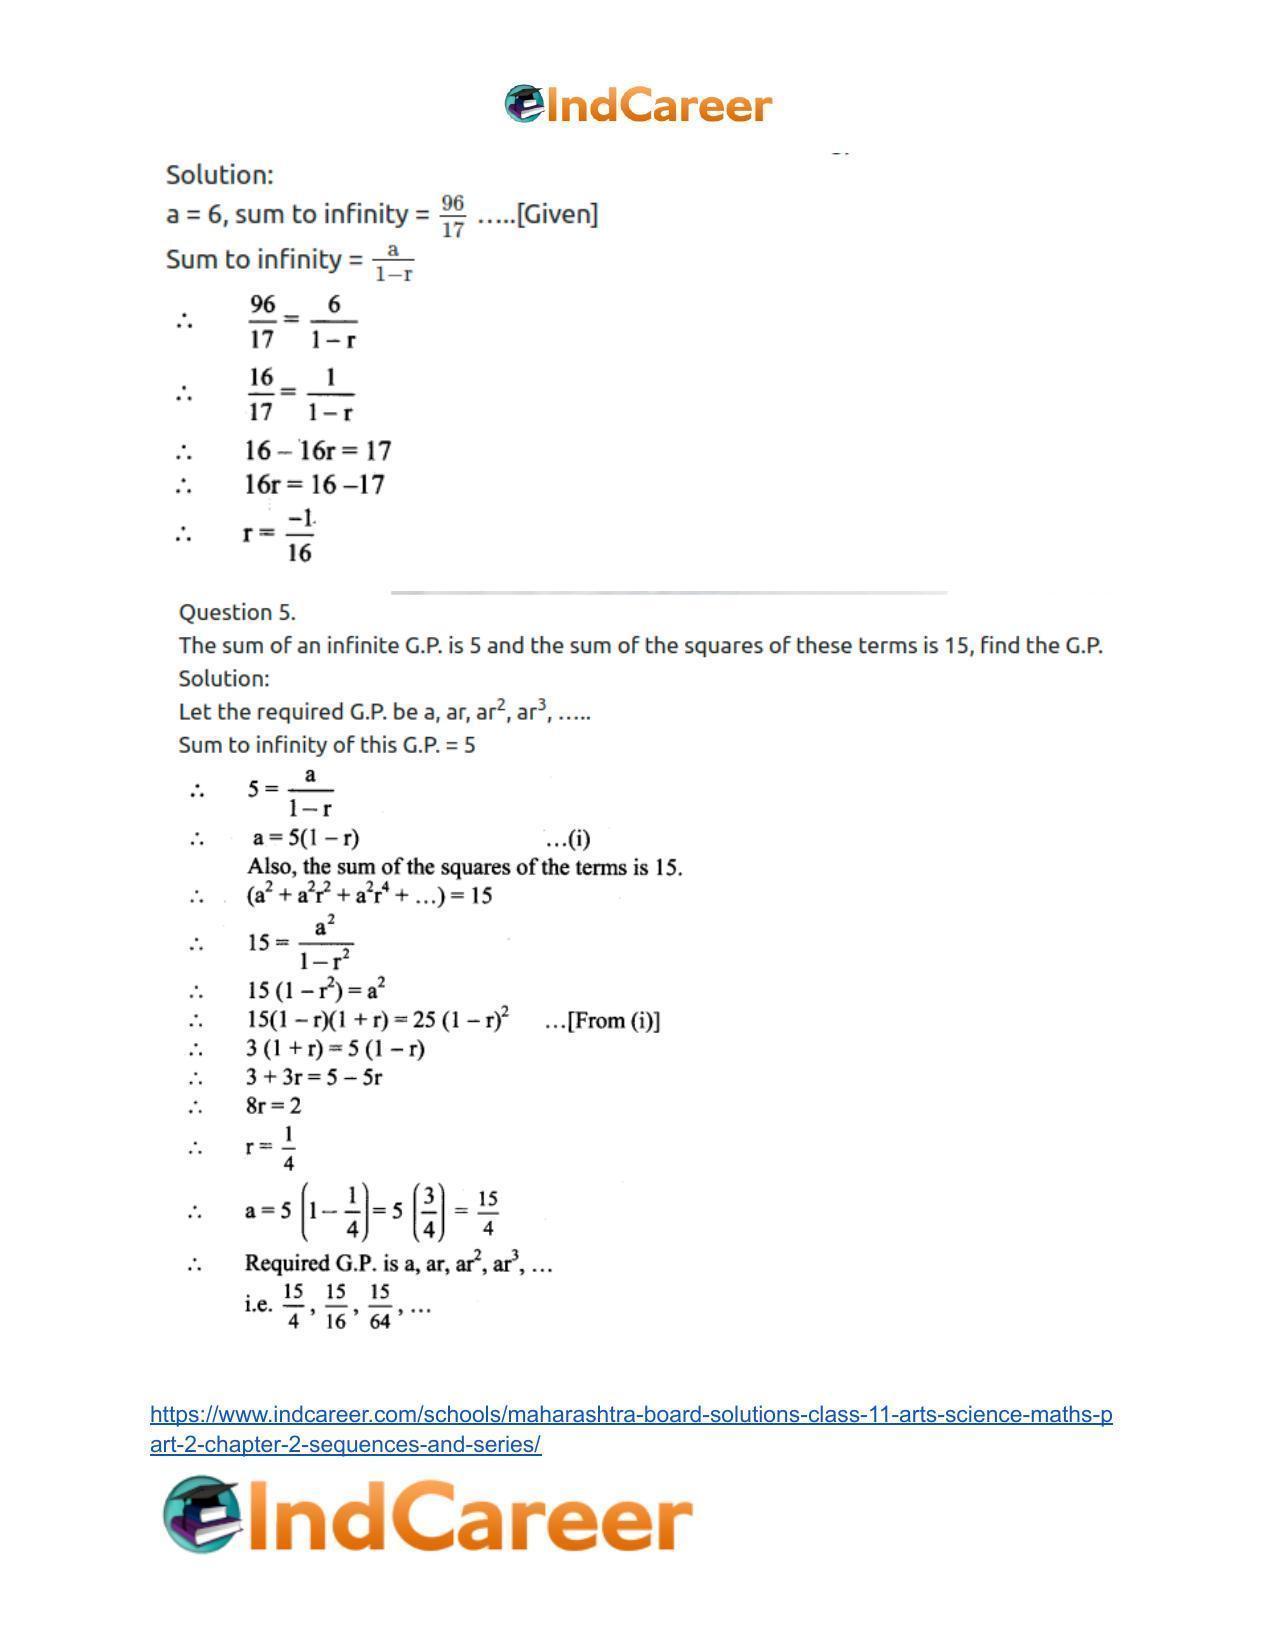 Maharashtra Board Solutions Class 11-Arts & Science Maths (Part 2): Chapter 2- Sequences and Series - Page 44